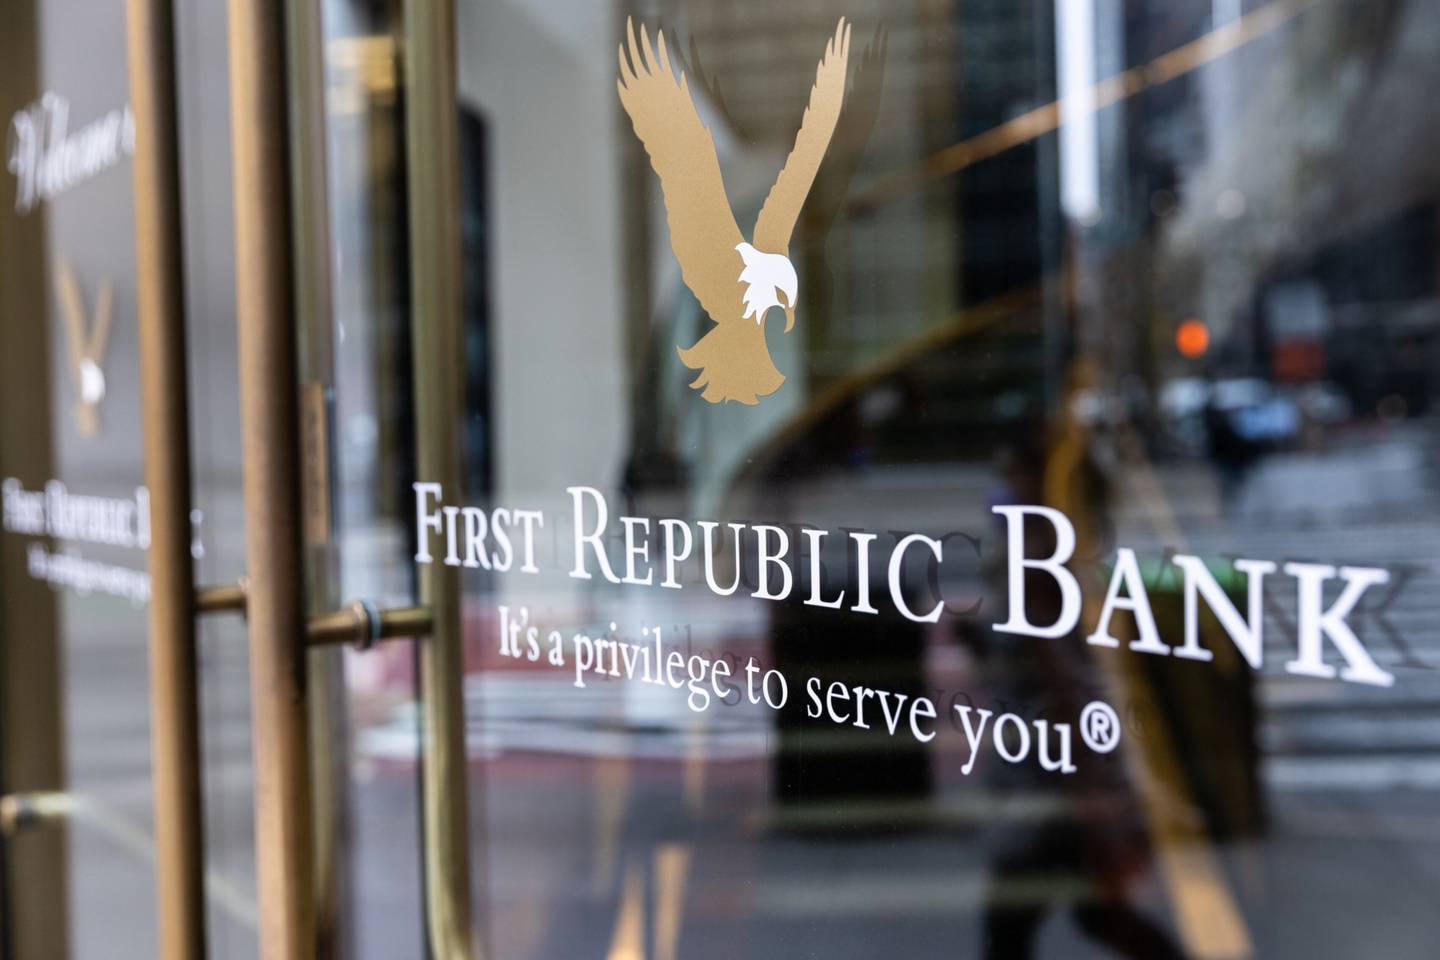 A First Republic Bank branch in New York, US, on Friday, March 10, 2023.